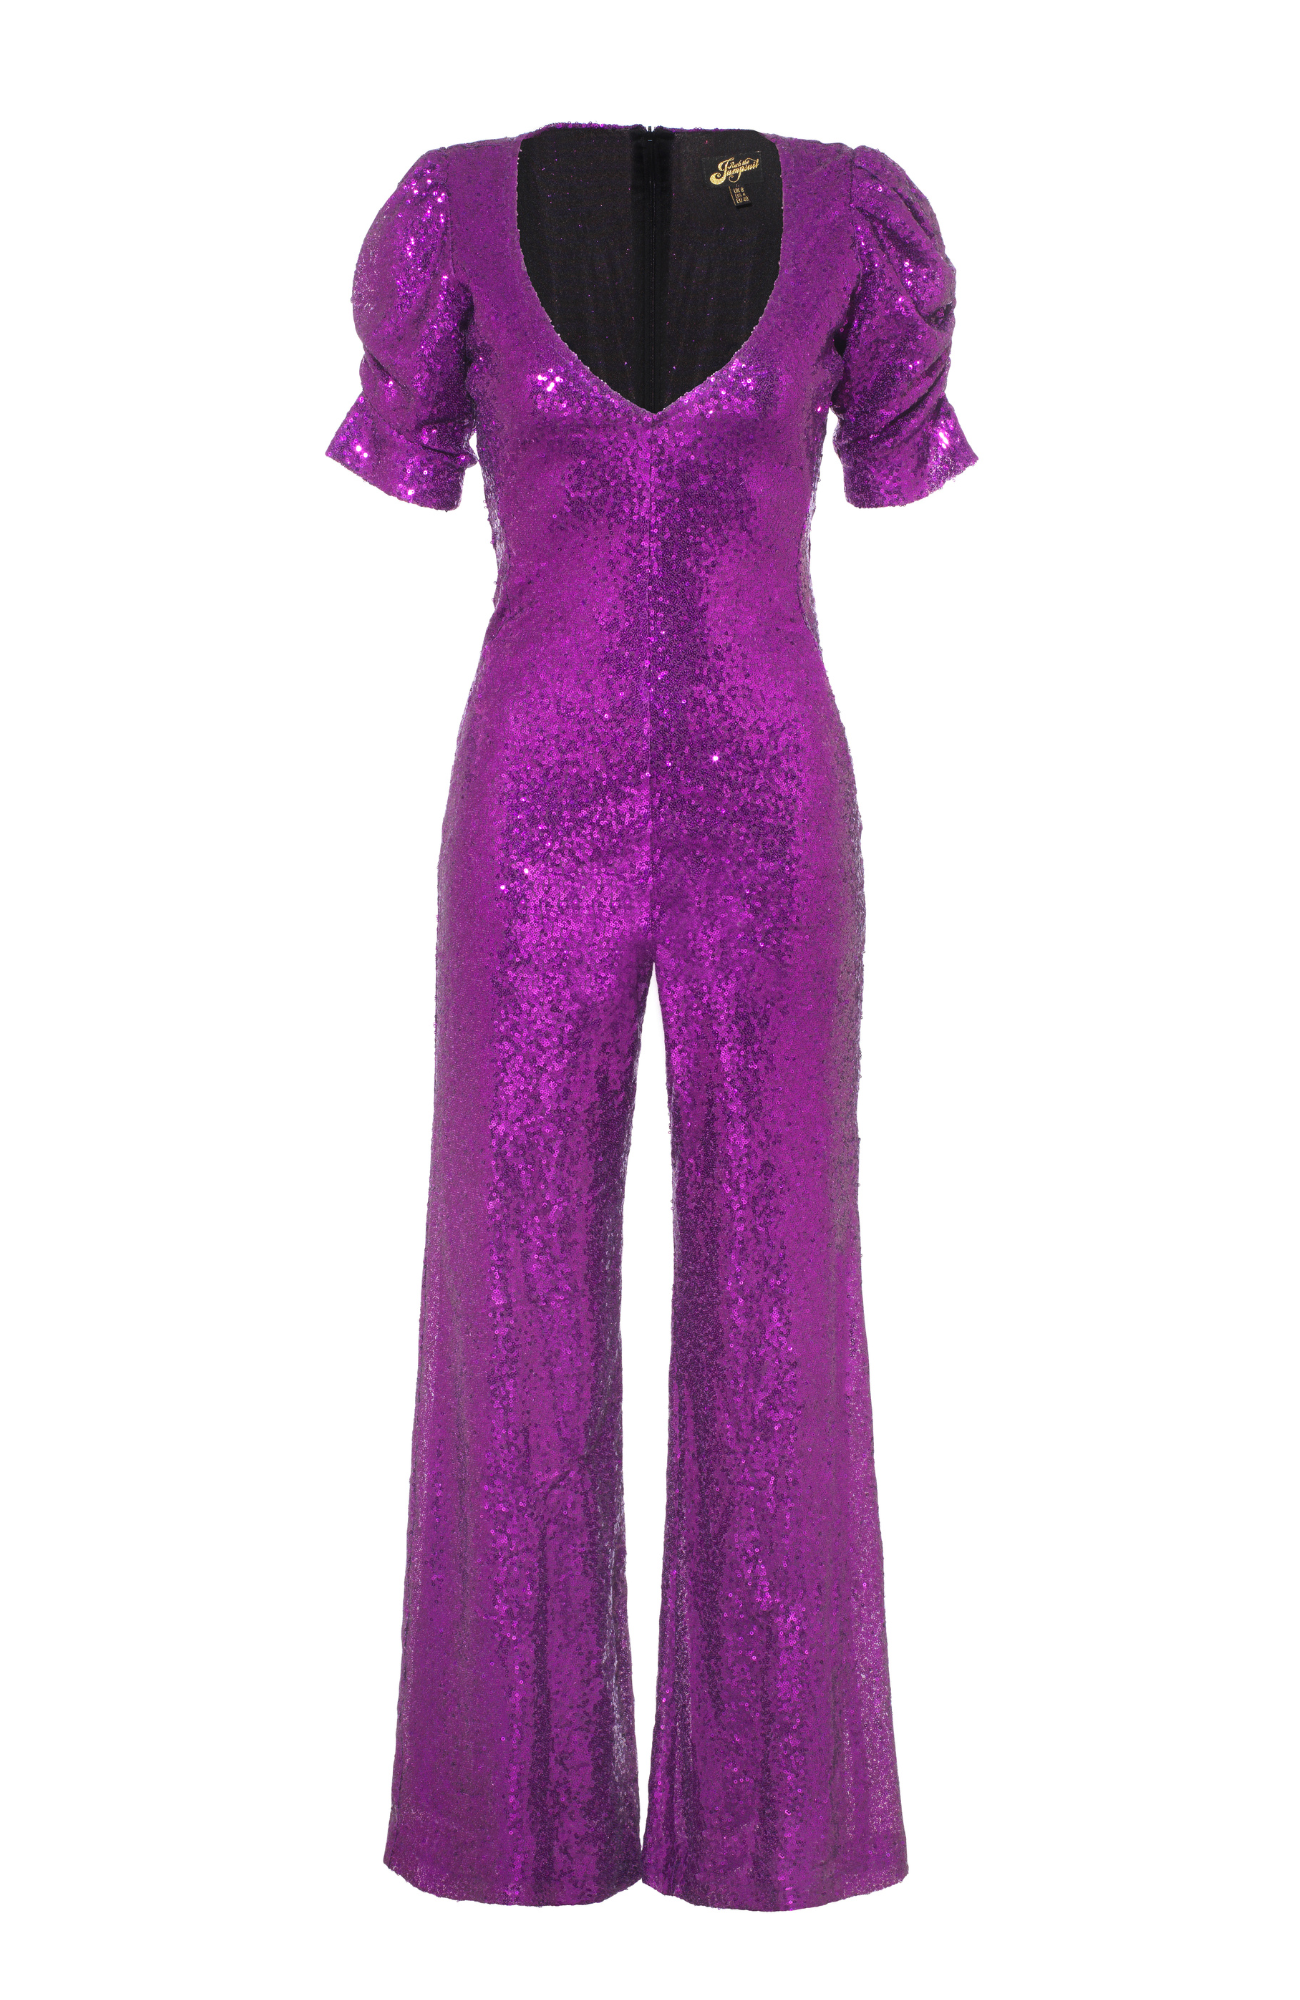 The DOLLY Catsuit - Long leg Variation - Rock the Jumpsuit